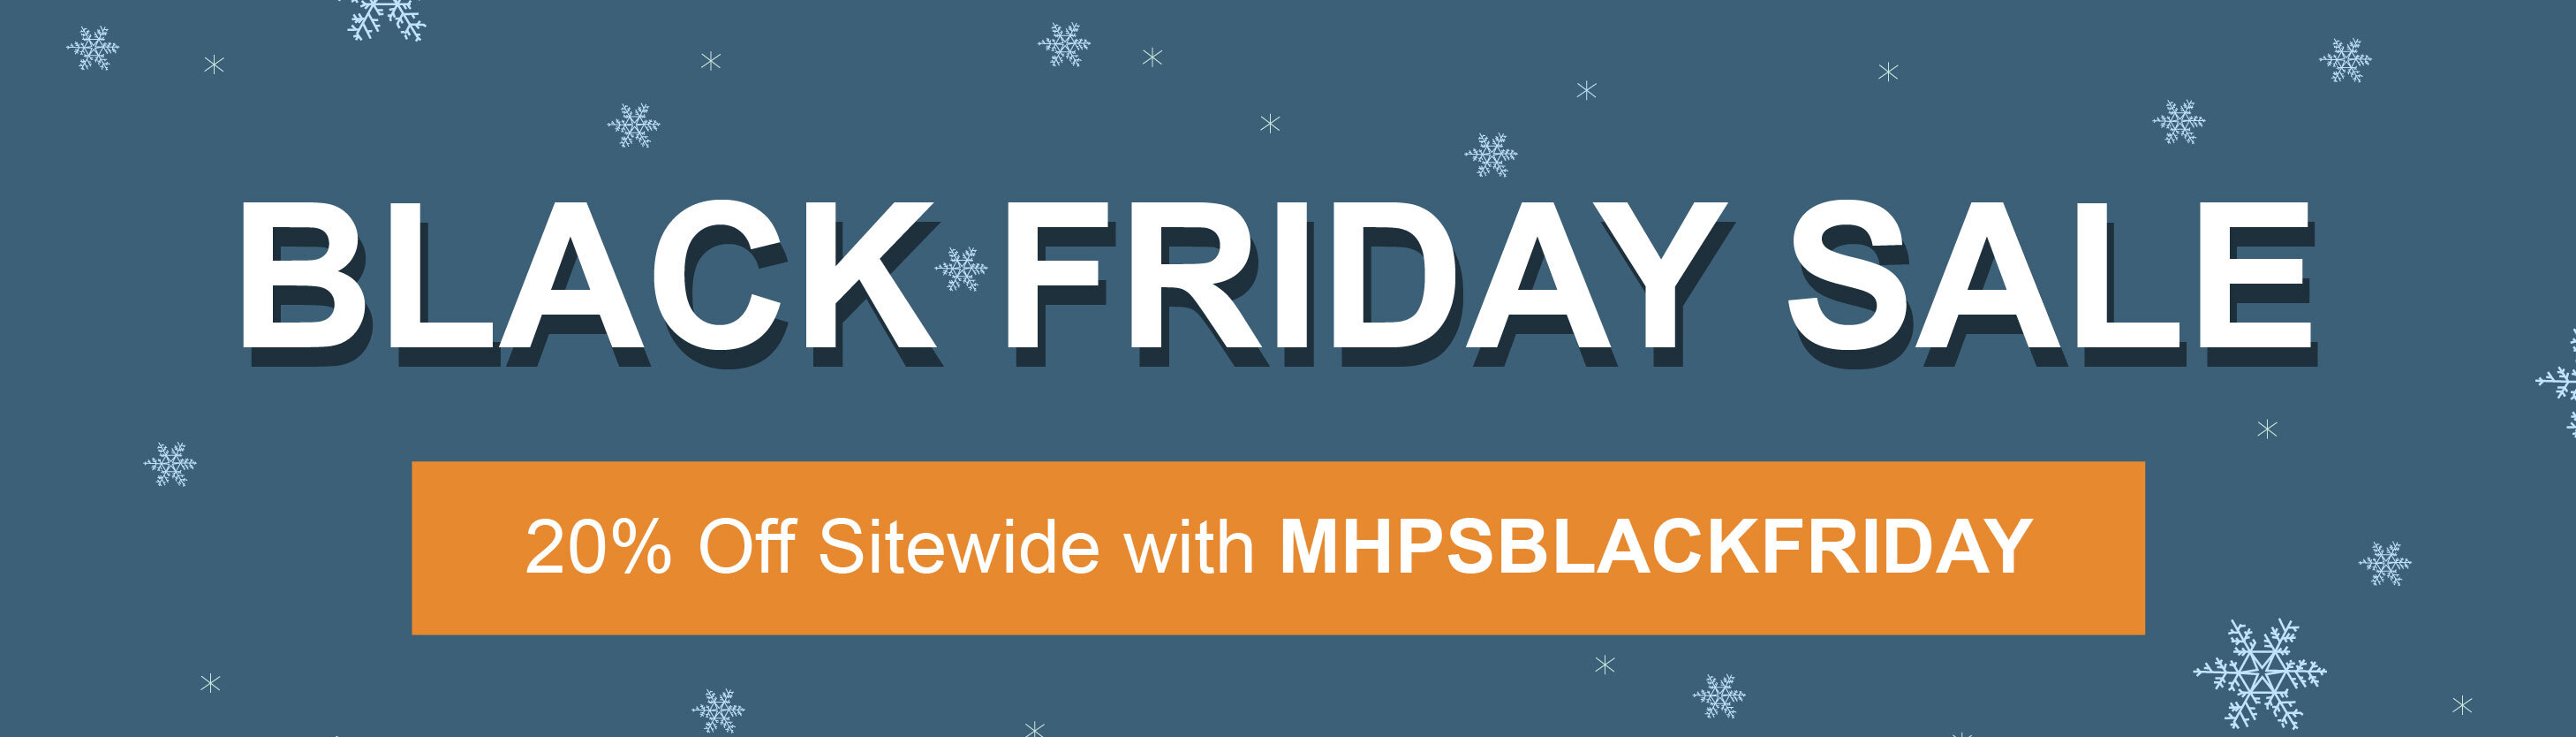 20% off Sitewide with MHPSBLACKFRIDAY